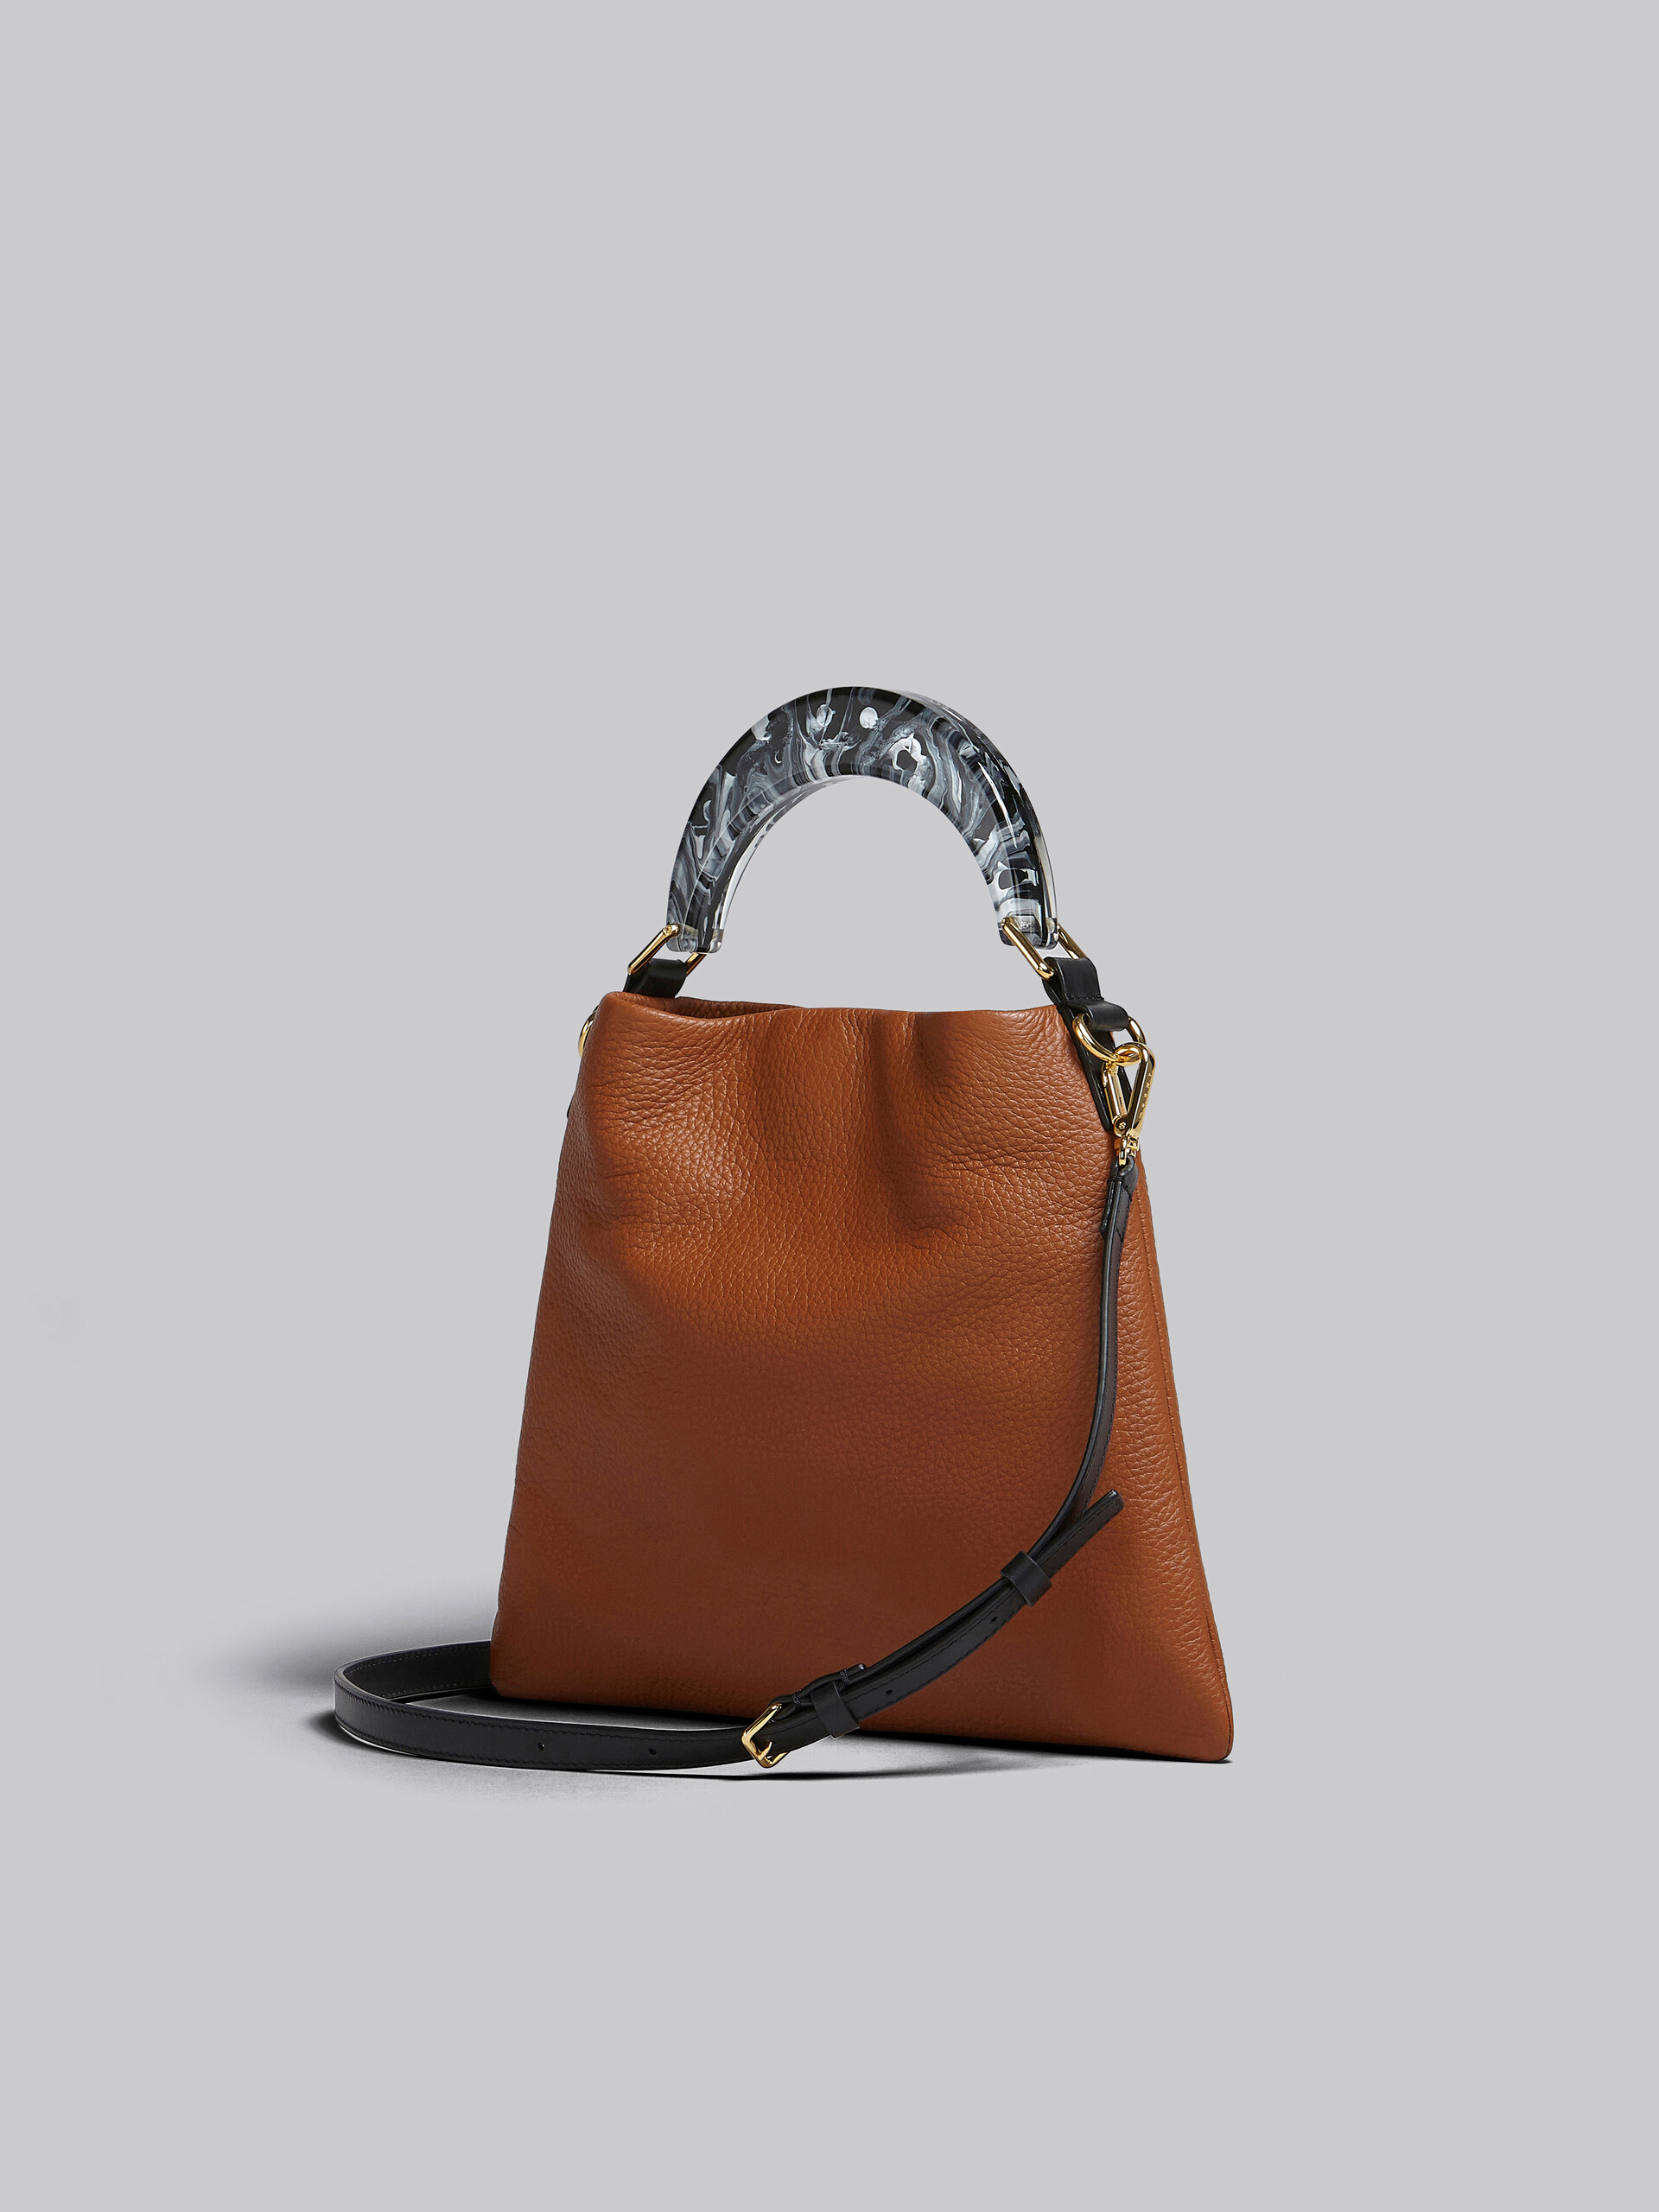 Venice small bag in brown leather - Shoulder Bag - Image 3